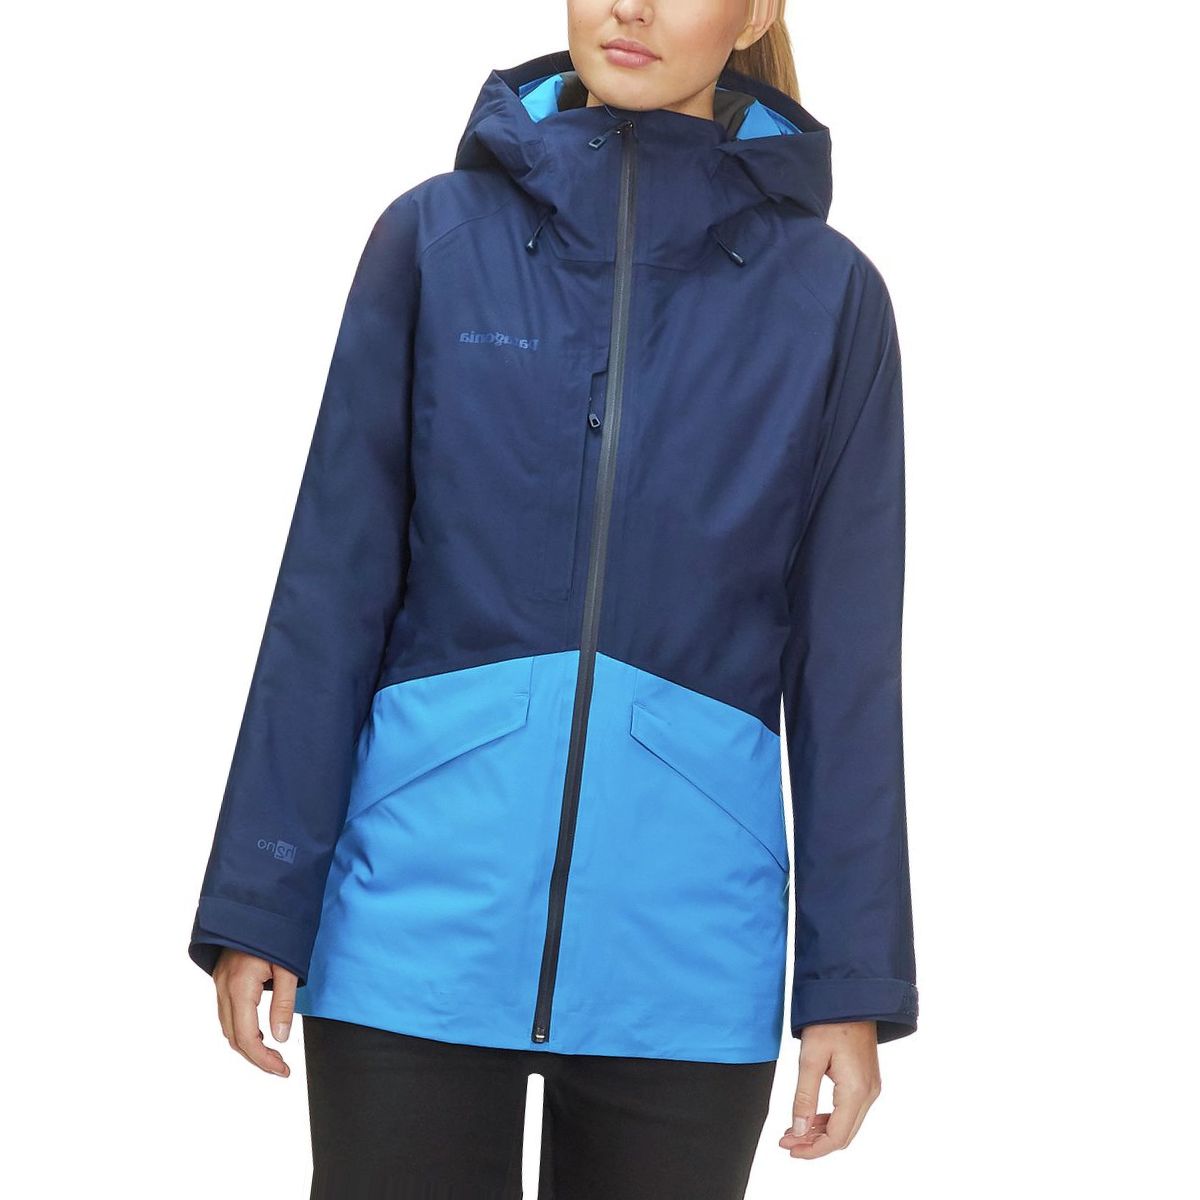 Patagonia Insulated Snowbelle Jacket - Women's